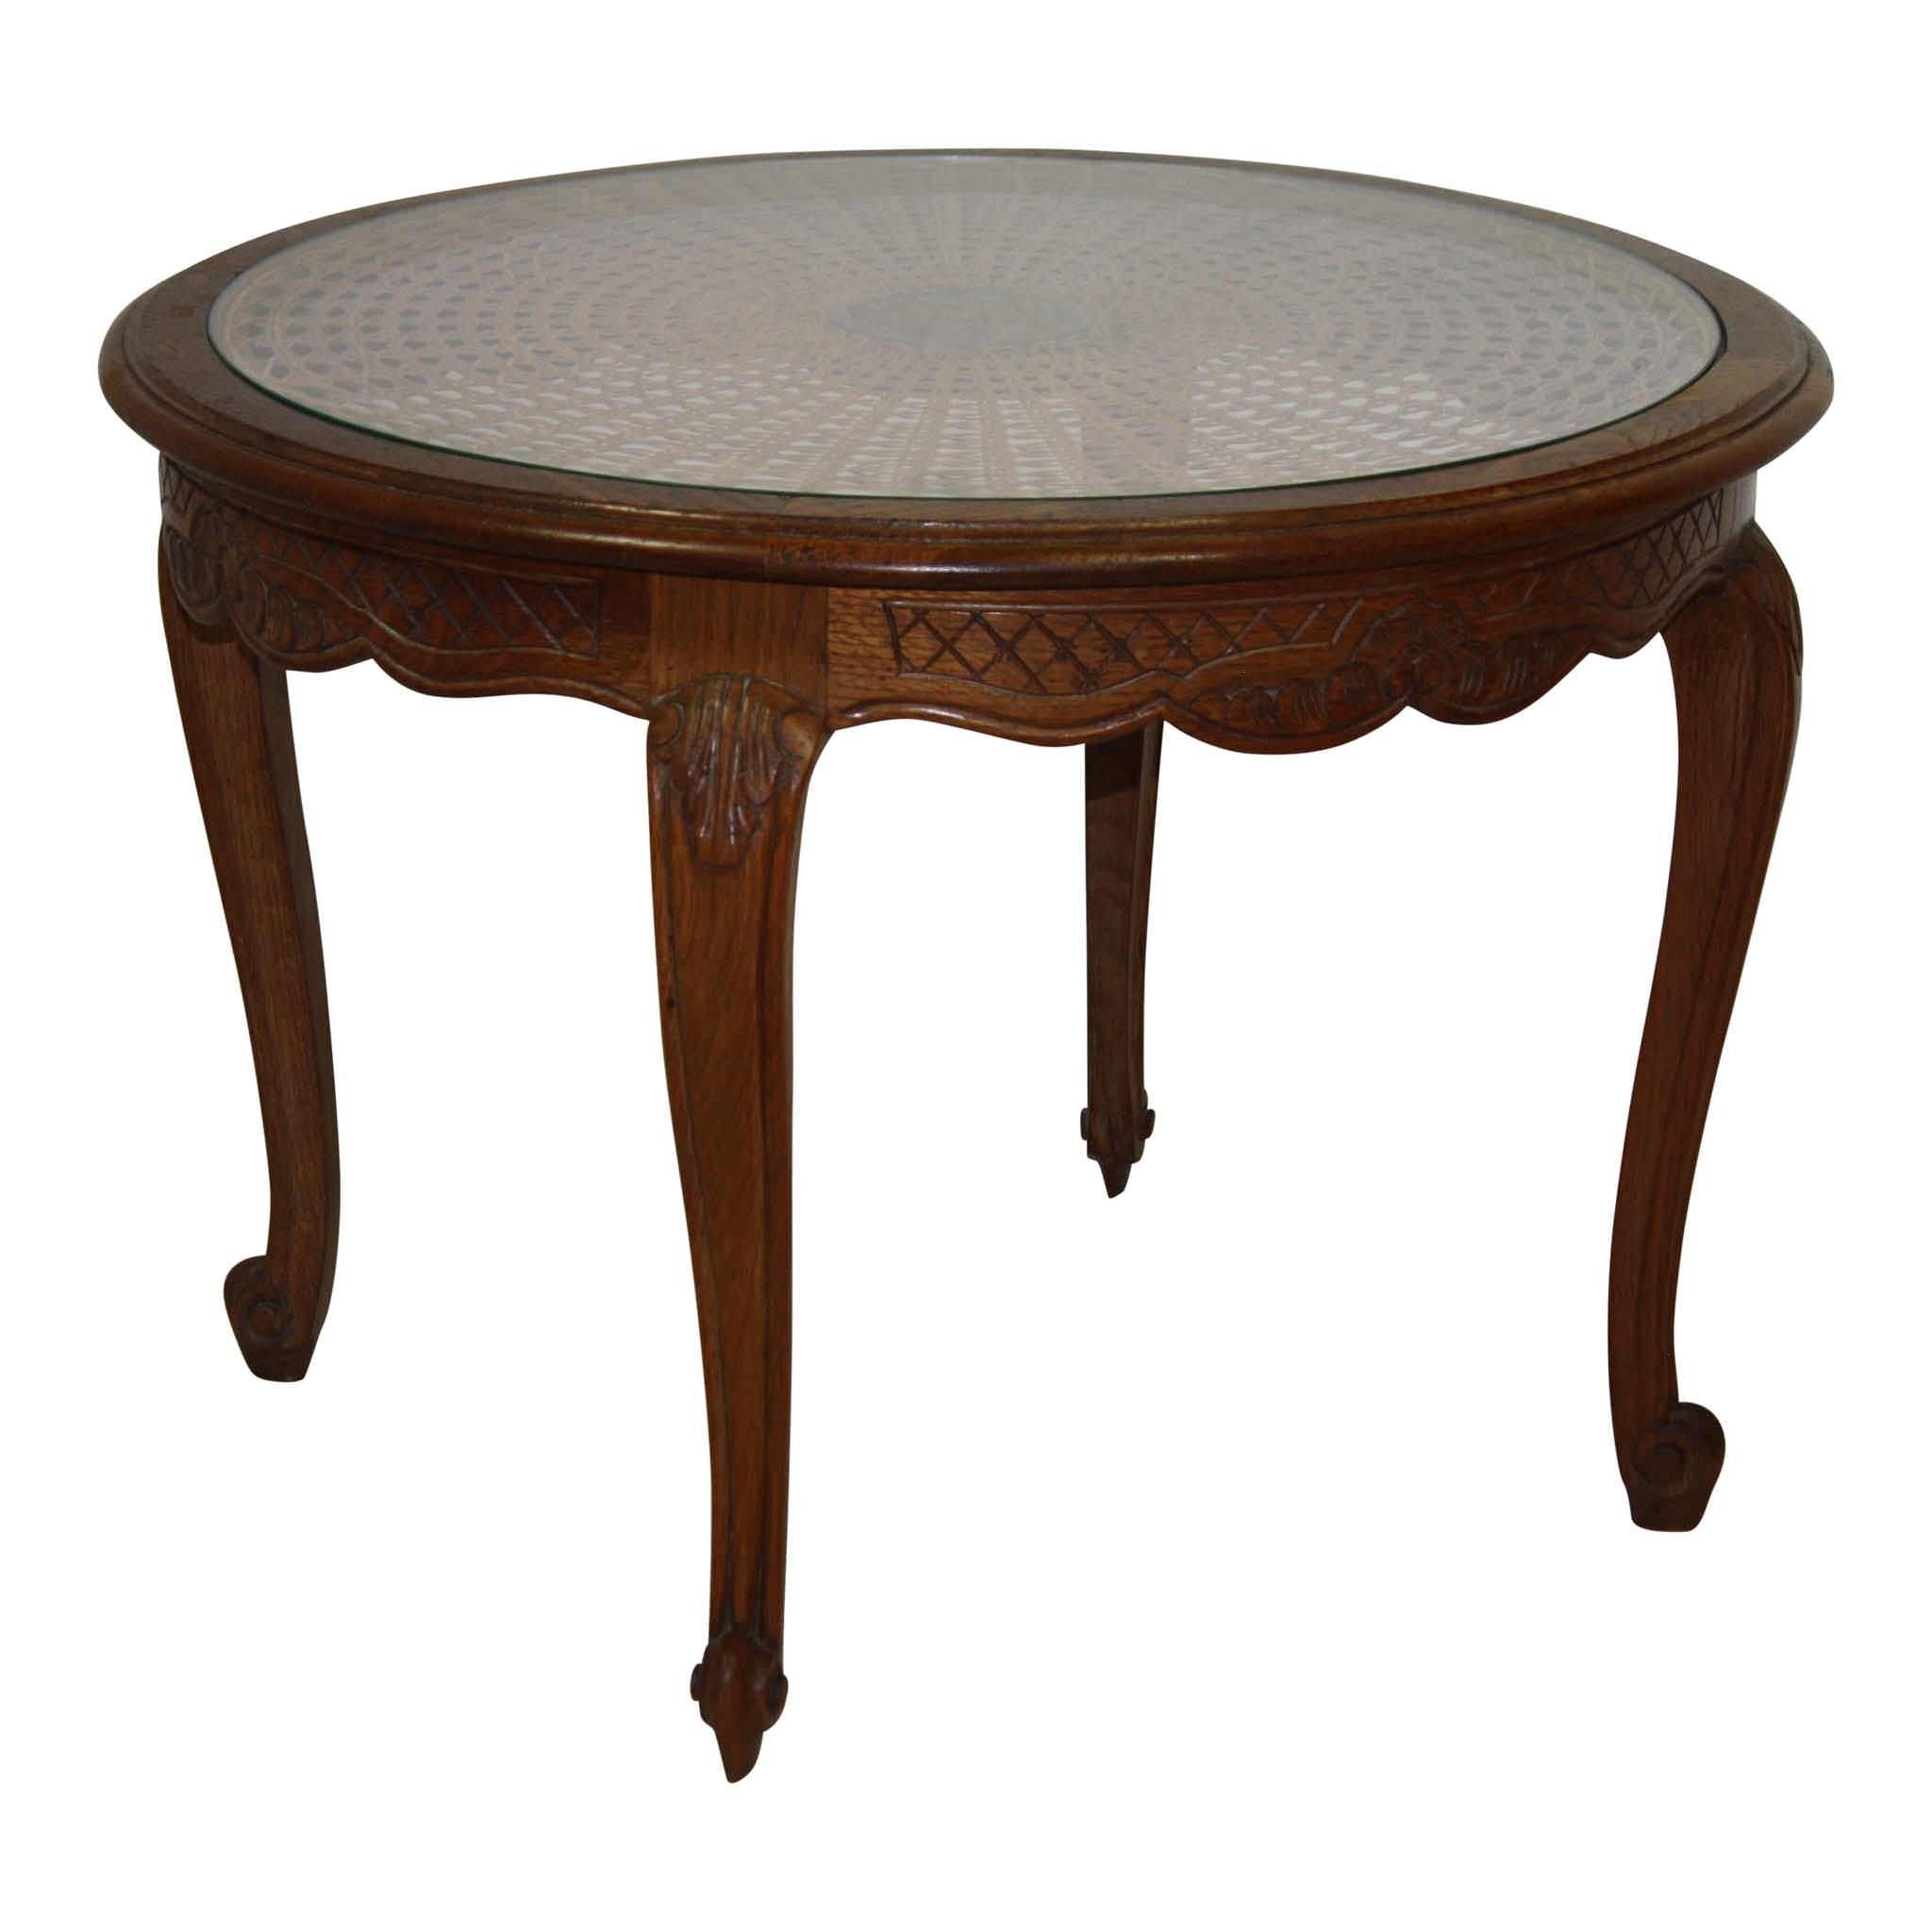 Round Cane Table